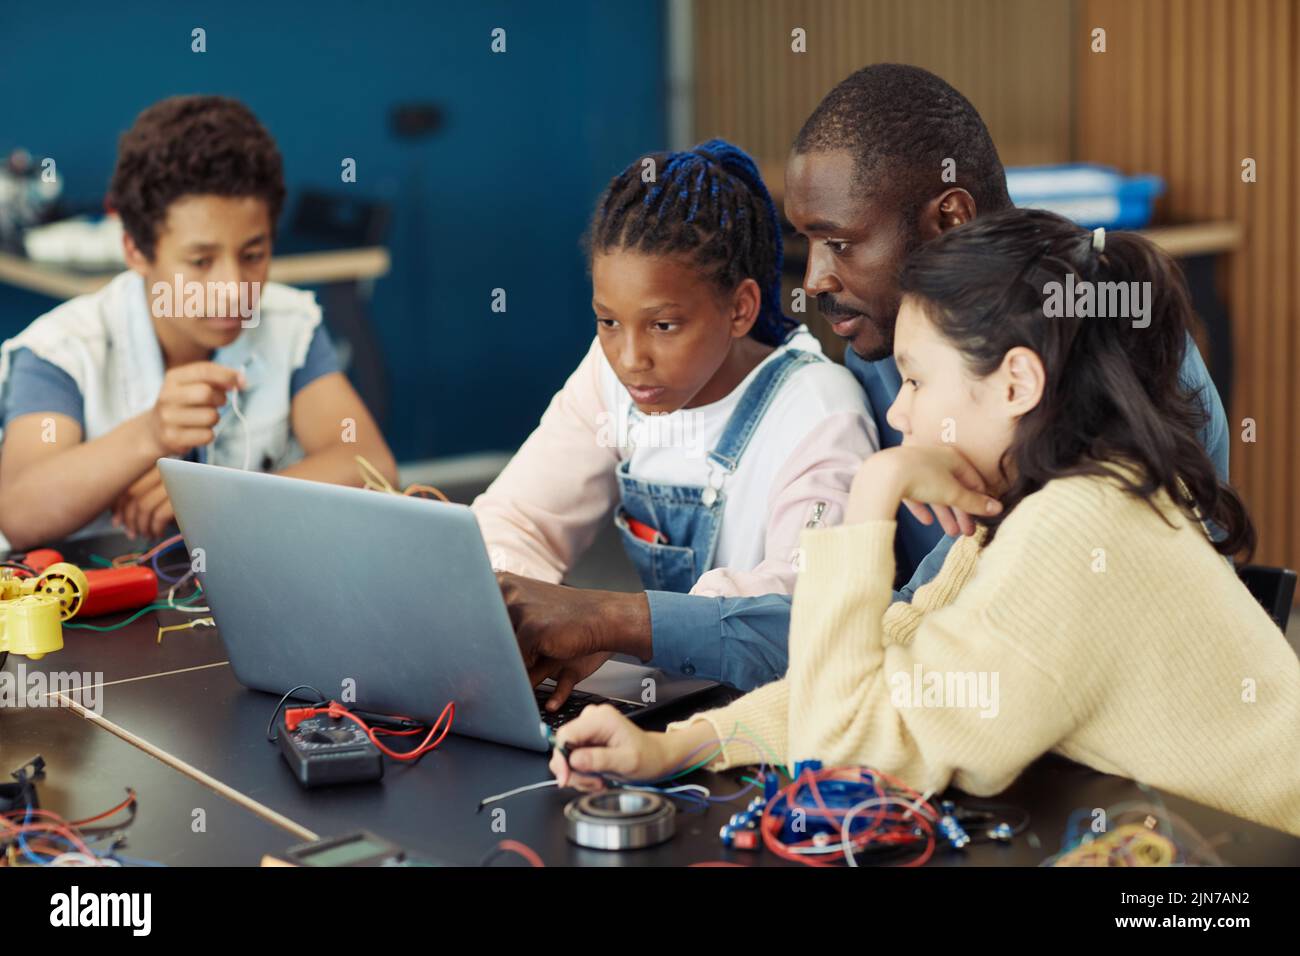 Portrait of black teenage girl using laptop in school during engineering class with male teacher and diverse group of children Stock Photo